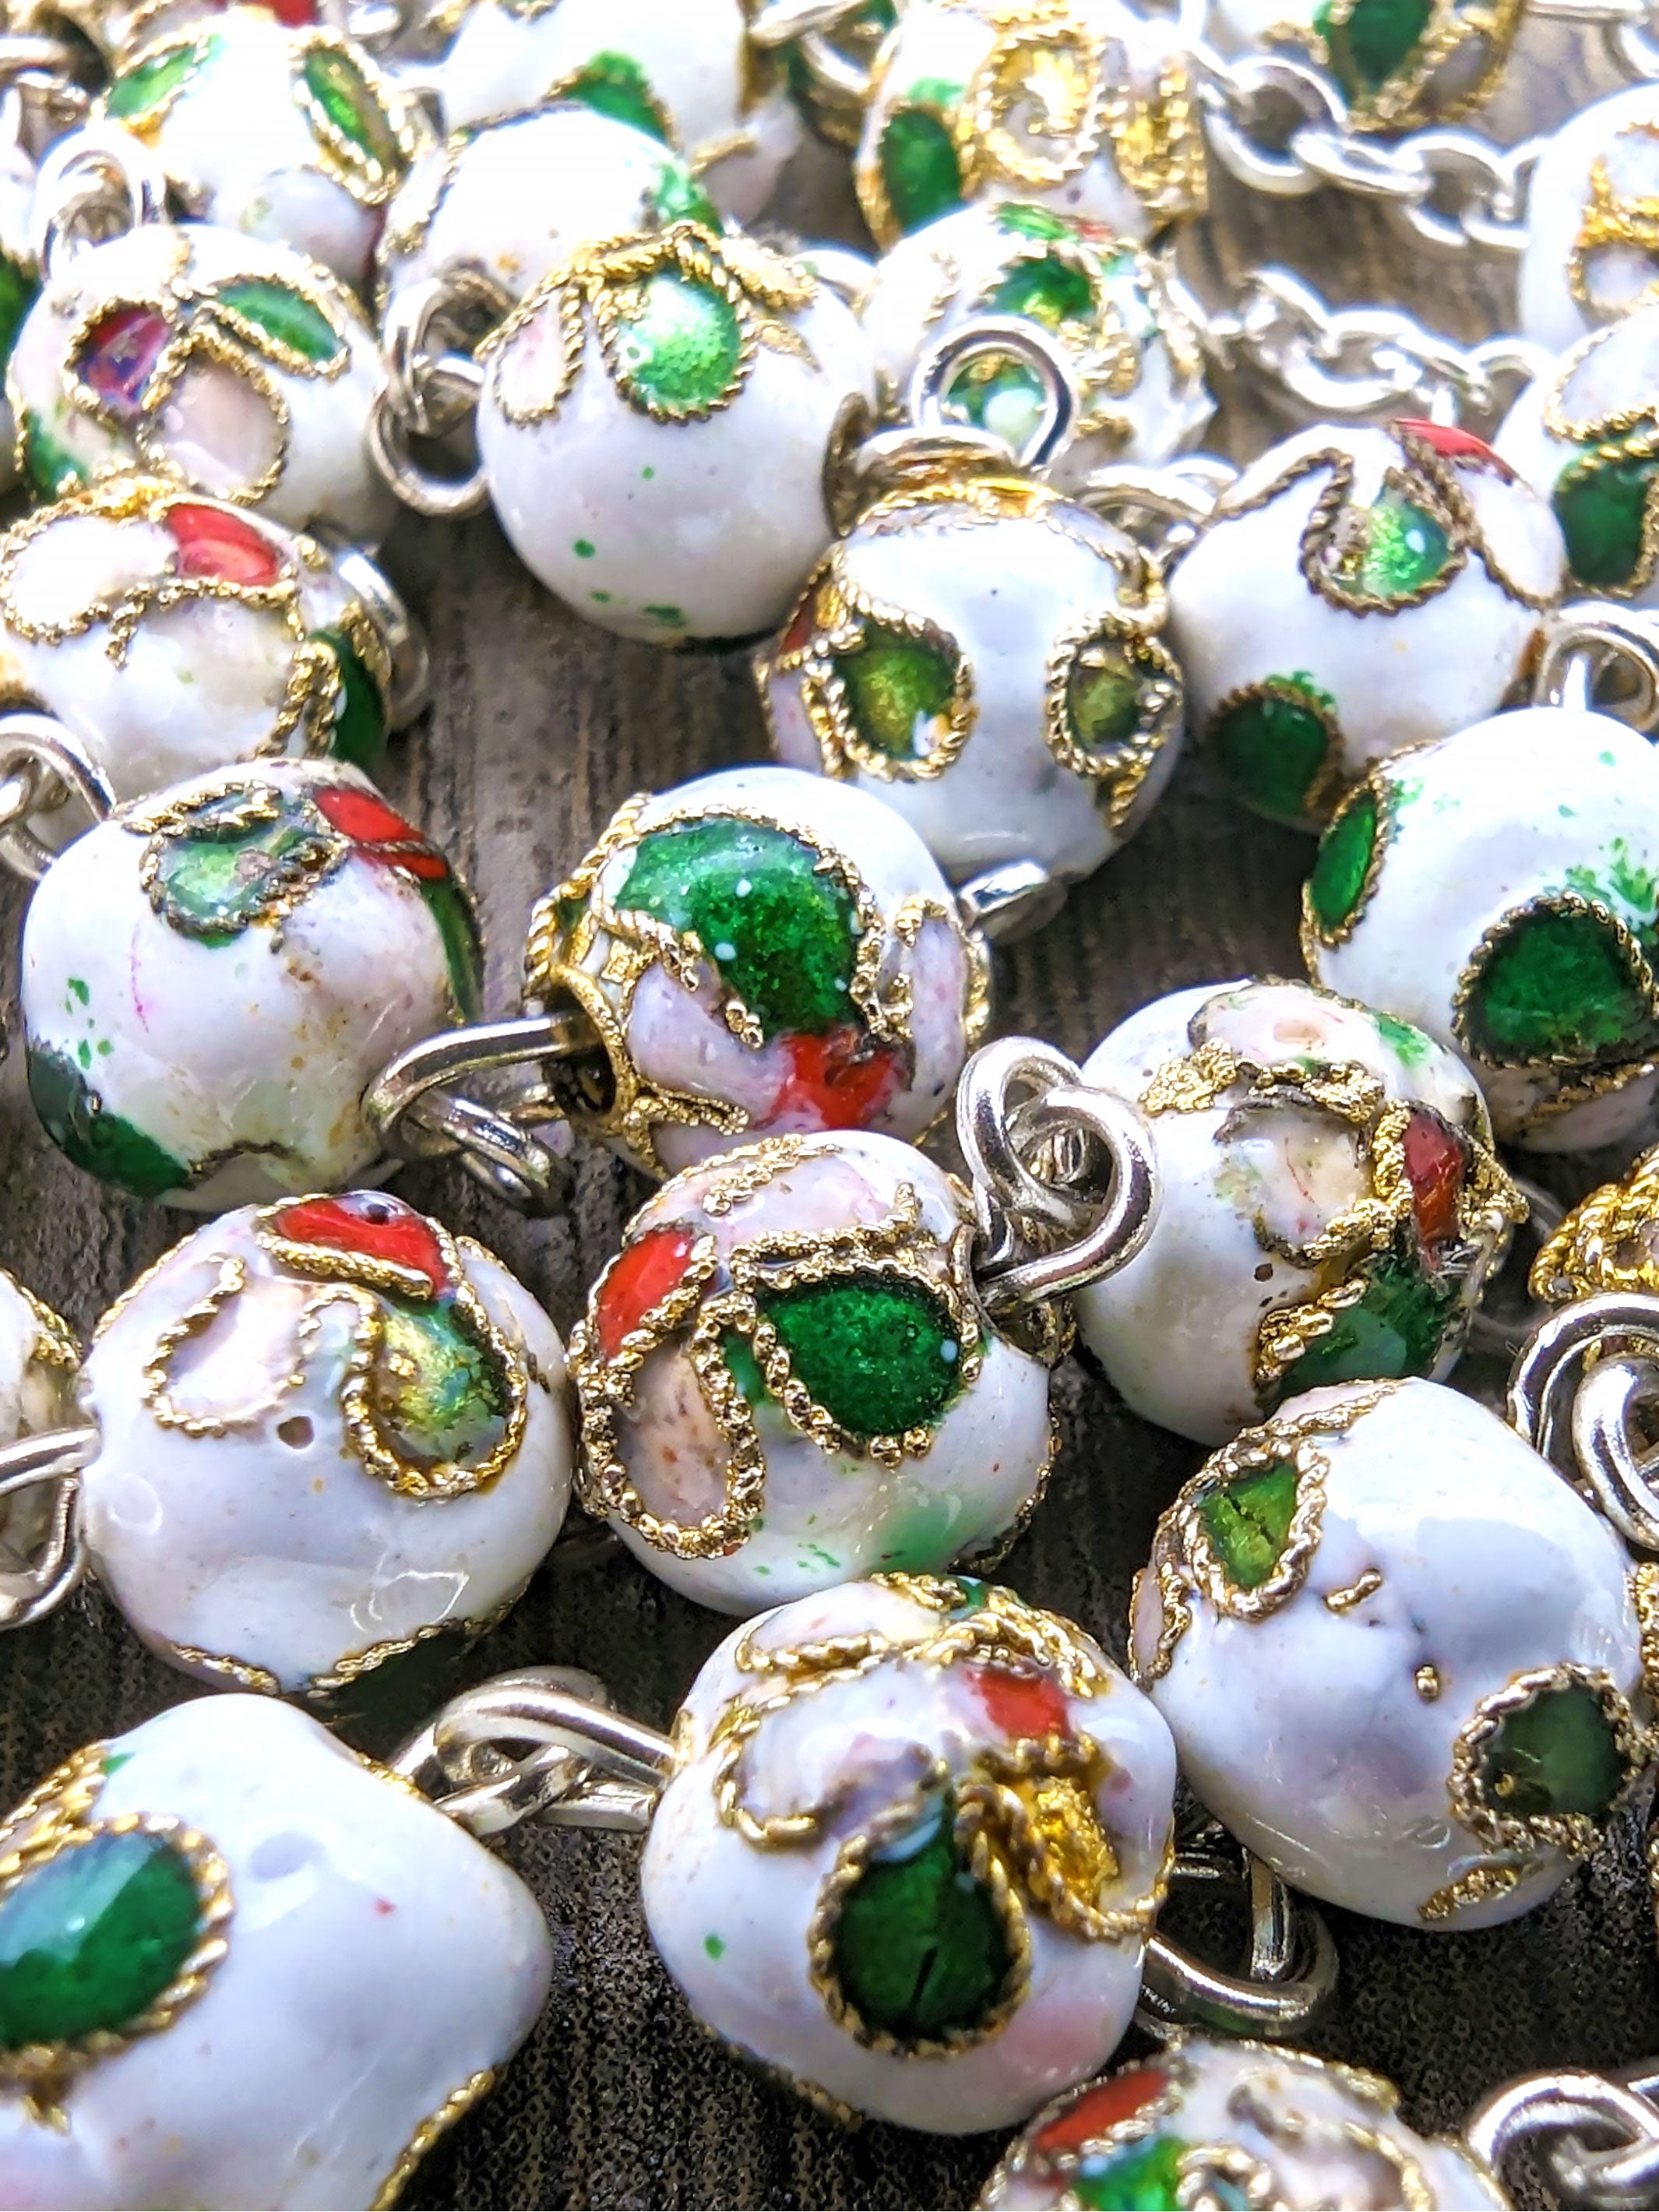 Handmade 8mm White Cloisonne Glass Beads Our Lady of Fatima Rosary